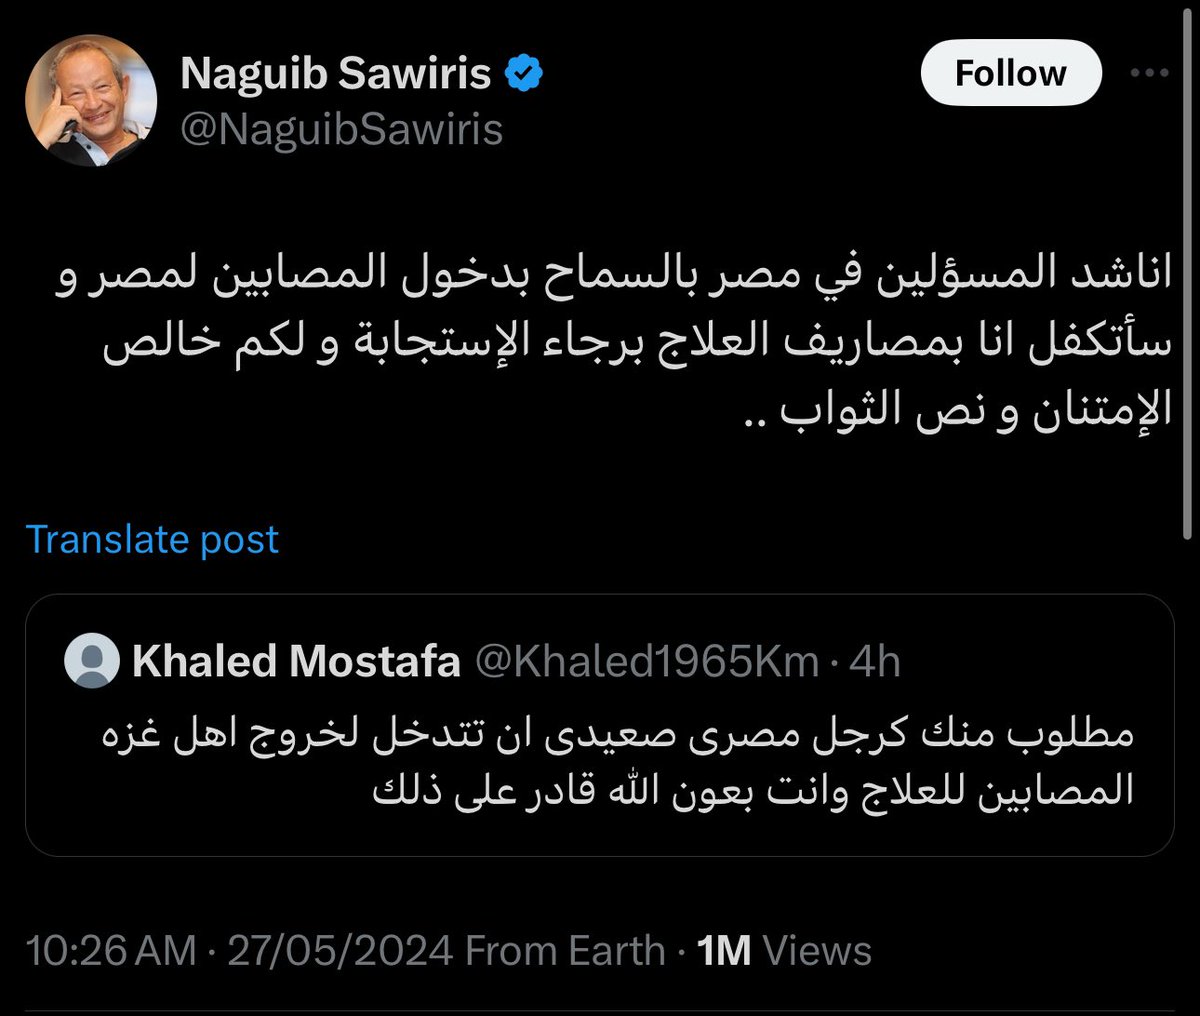 If only Egyption government were not lap dogs of Israel EGYPTIAN BILLIONAIRE PLEADING THE EGYPTIAN GOVERNMENT. “I appeal to the officials in Egypt to allow the entry of the injured into Egypt, and I will cover the treatment expenses.”